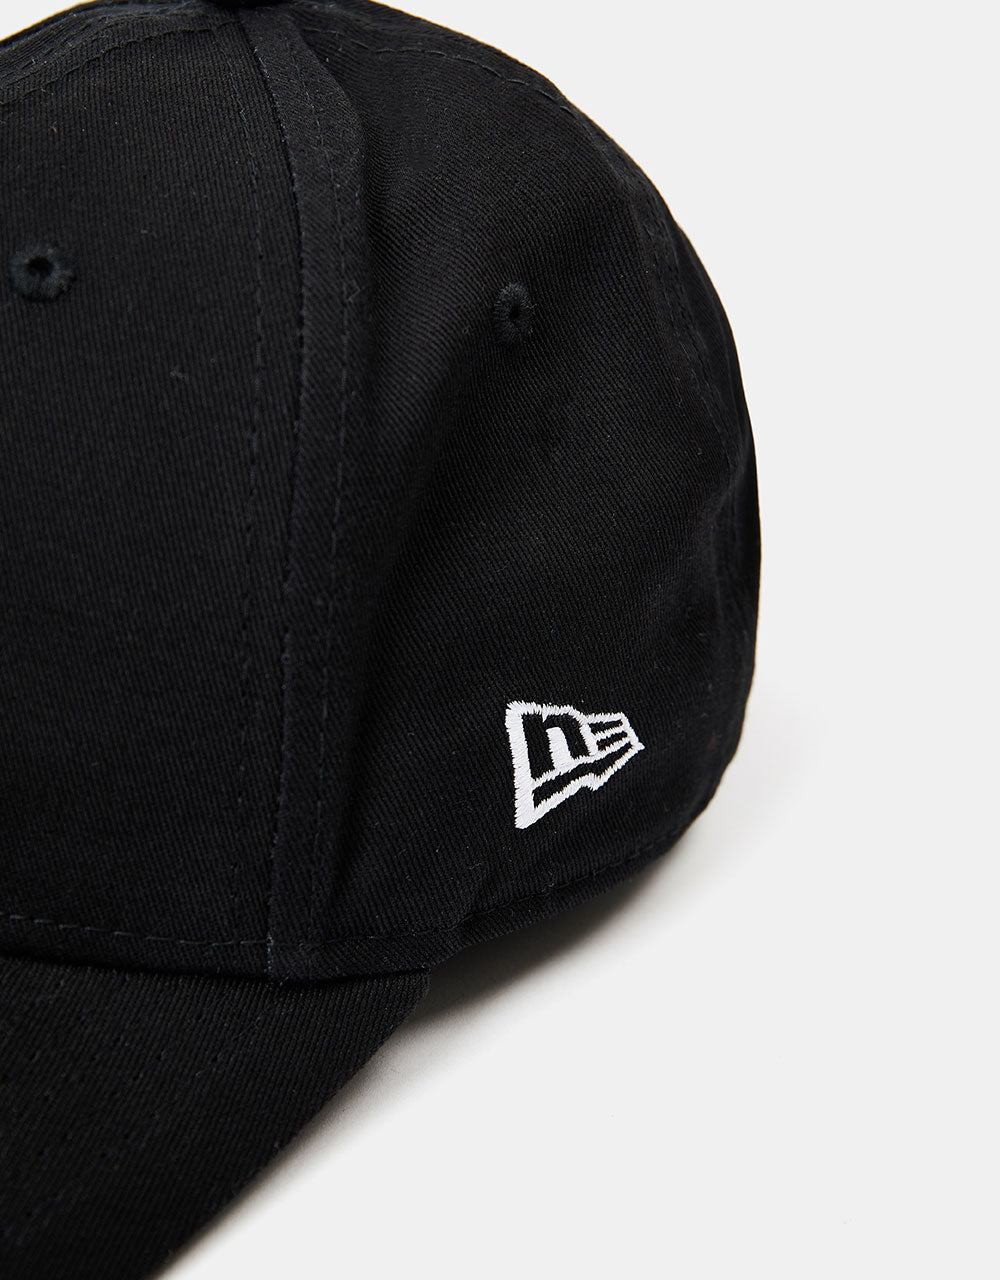 New Era 9Forty Flag Collection Cap - Black/White